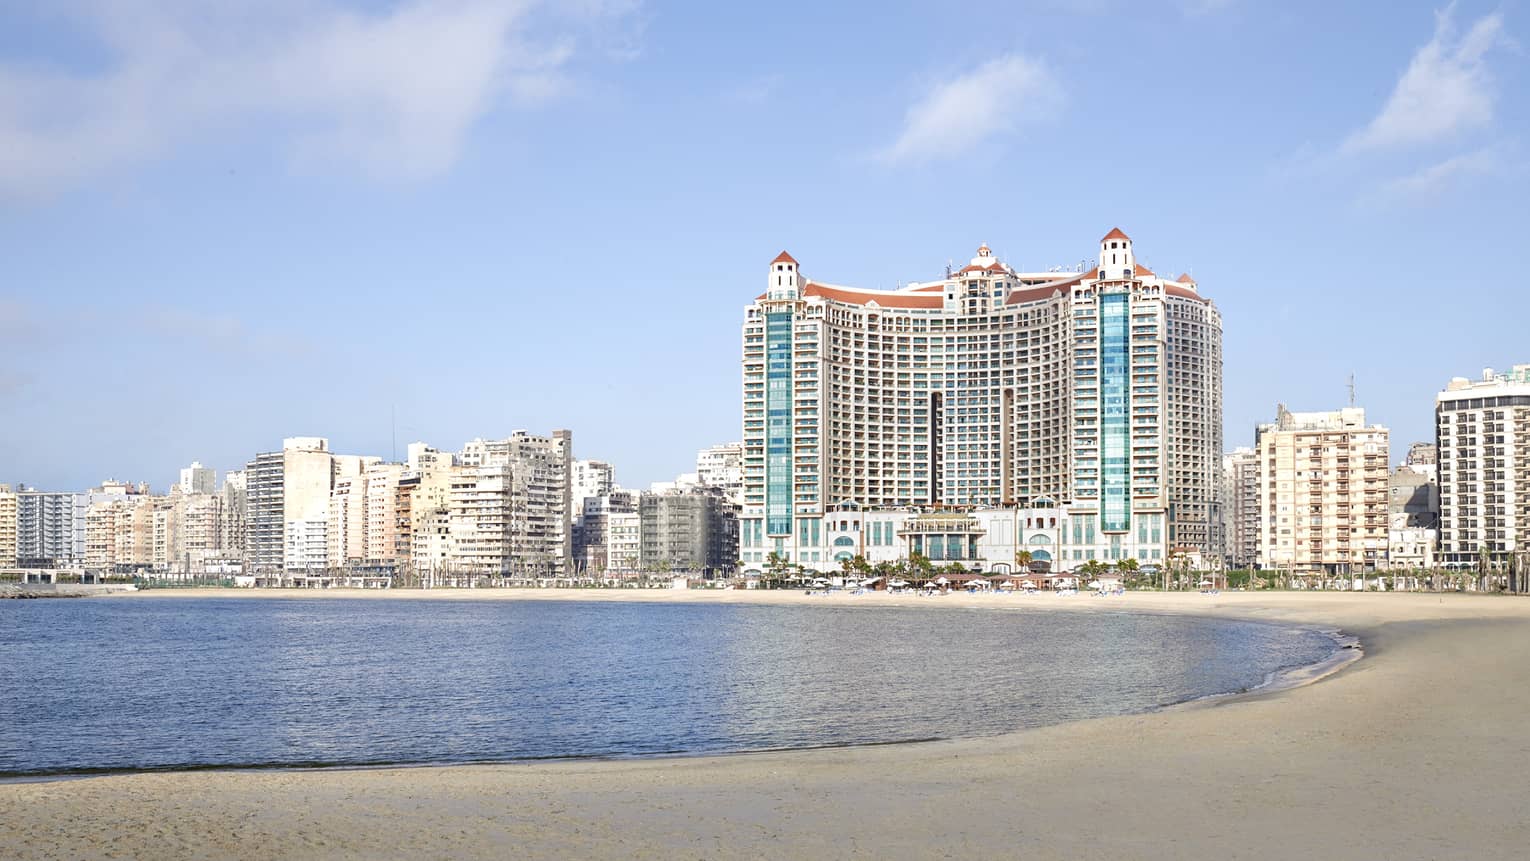 Hotel exterior against backdrop of the city on the beach